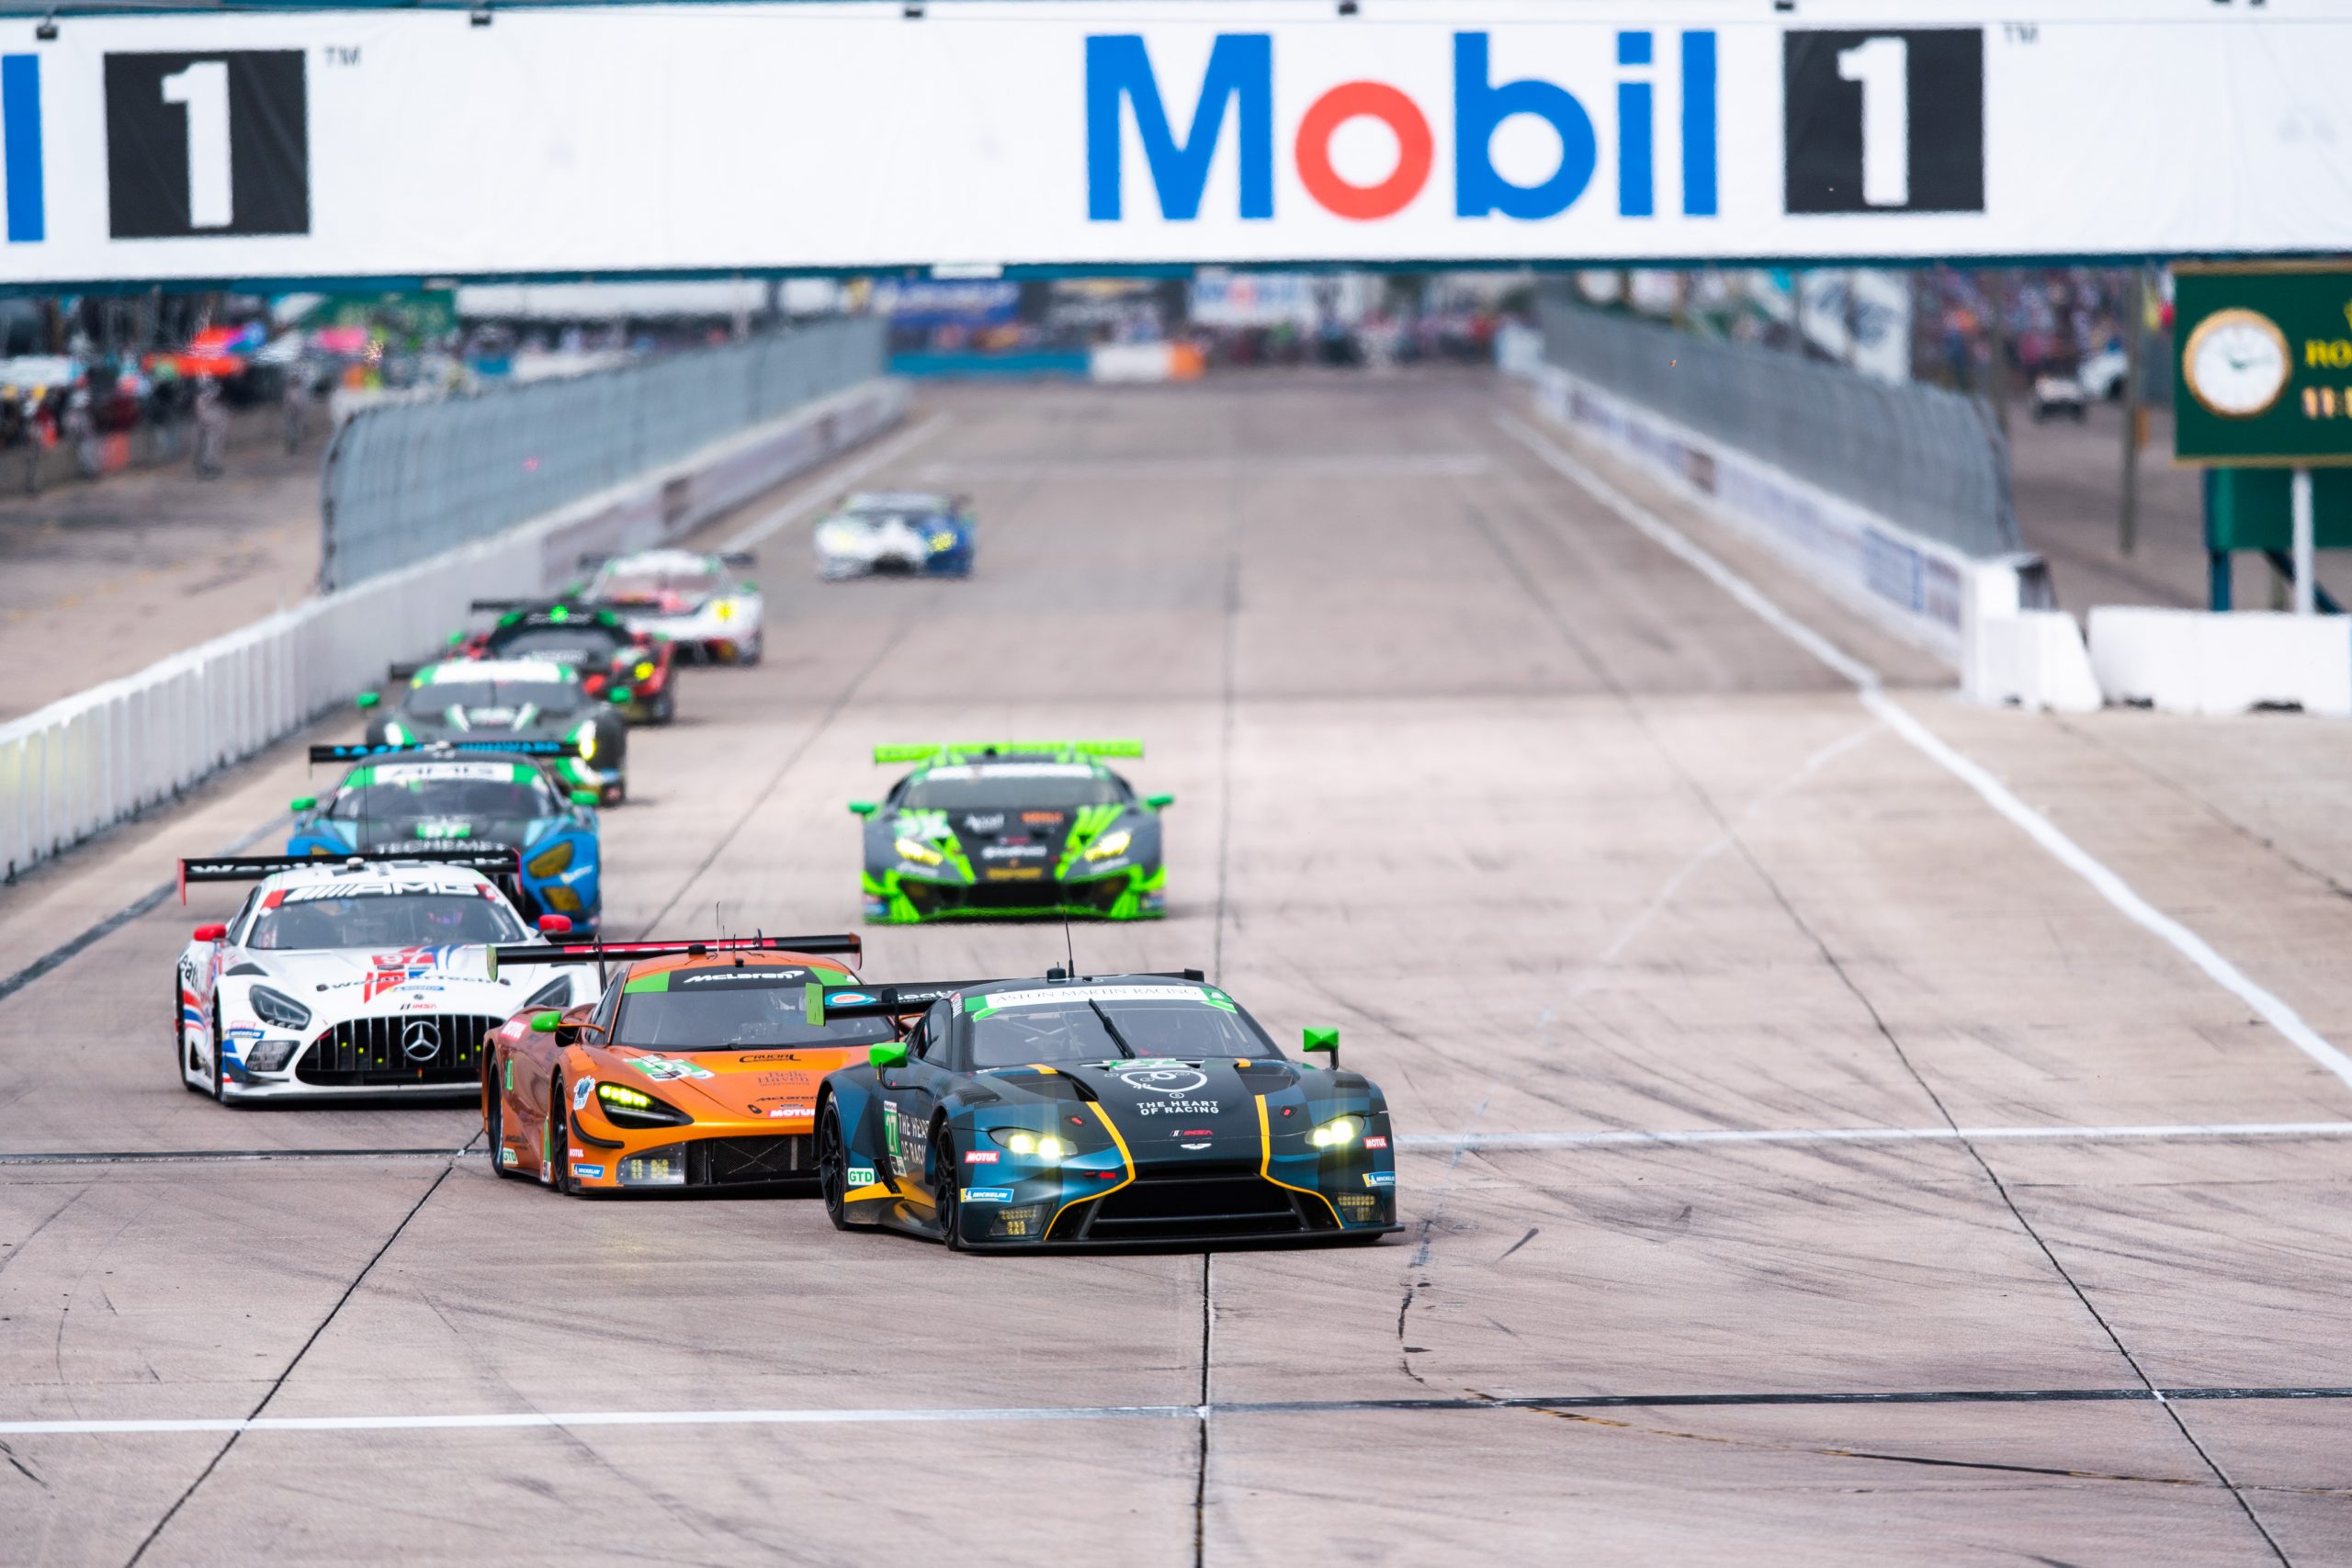 The Heart of Racing Looks to Carry Winning Momentum into Sebring 12